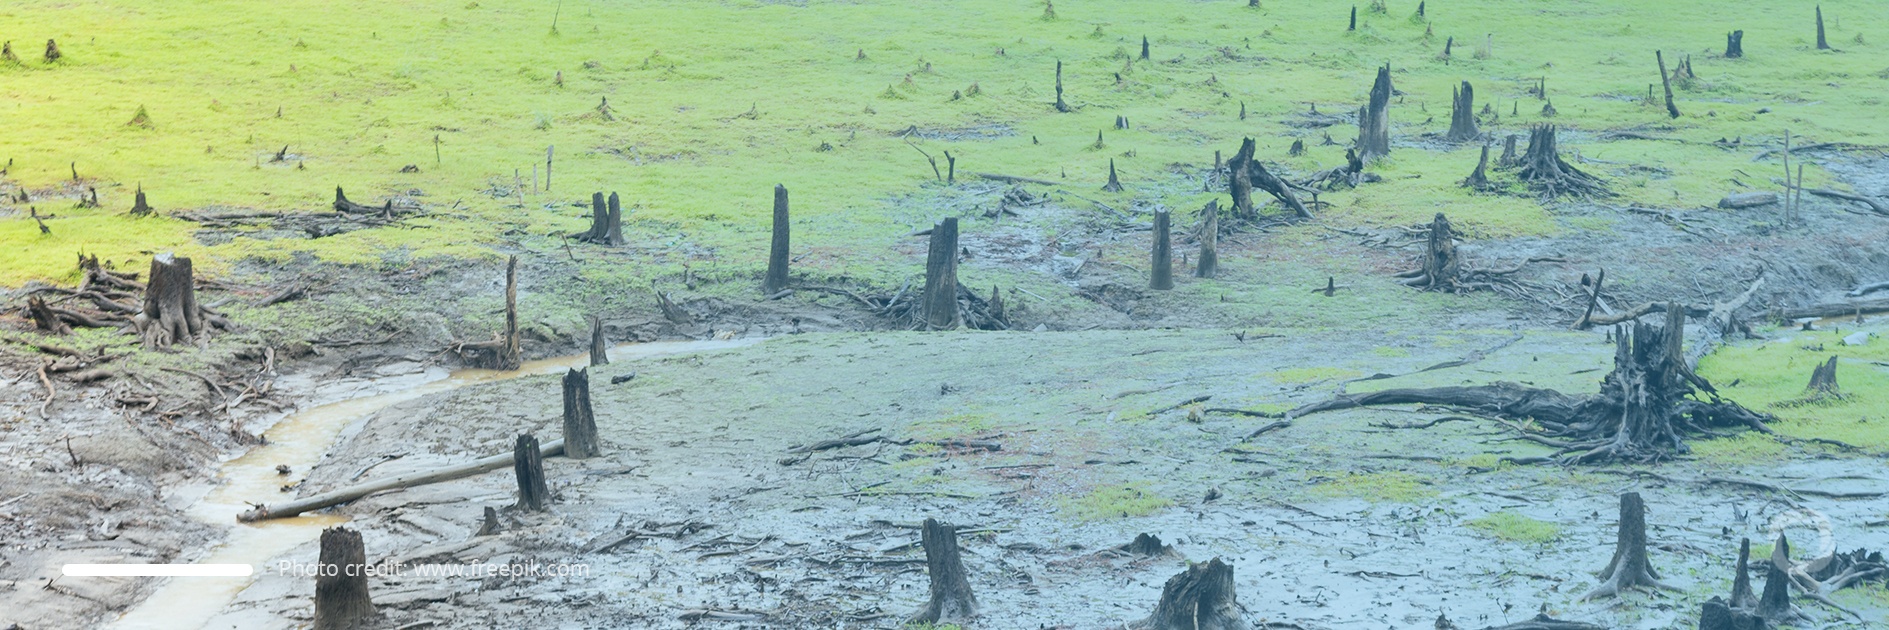 Human-caused deforestation becomes uncontrollable. Learn the consequences